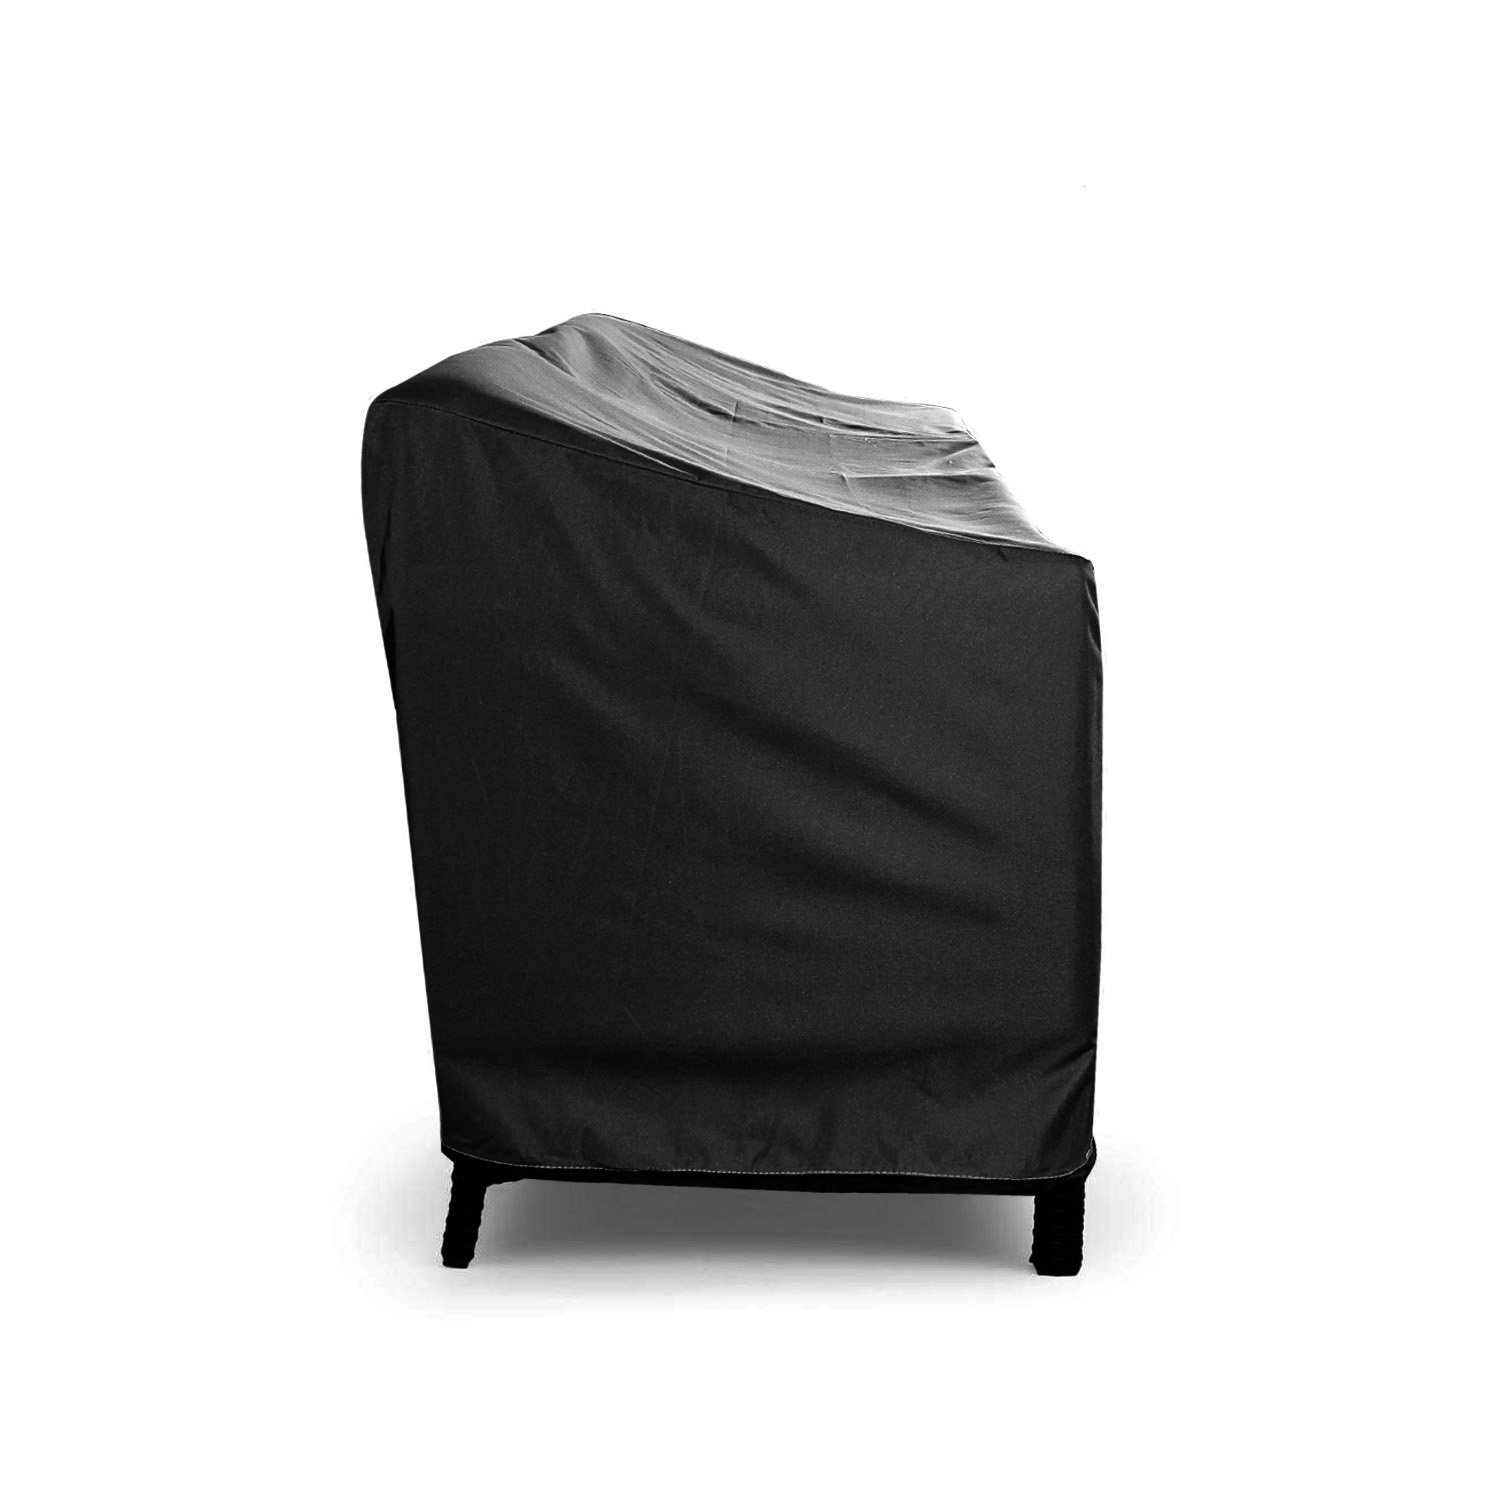 Outdoor Sofa Cover 88" x 32" x 33" Weatherproof Loveseat Outdoor Couch Patio Furniture Protector Large - Black - image 4 of 5